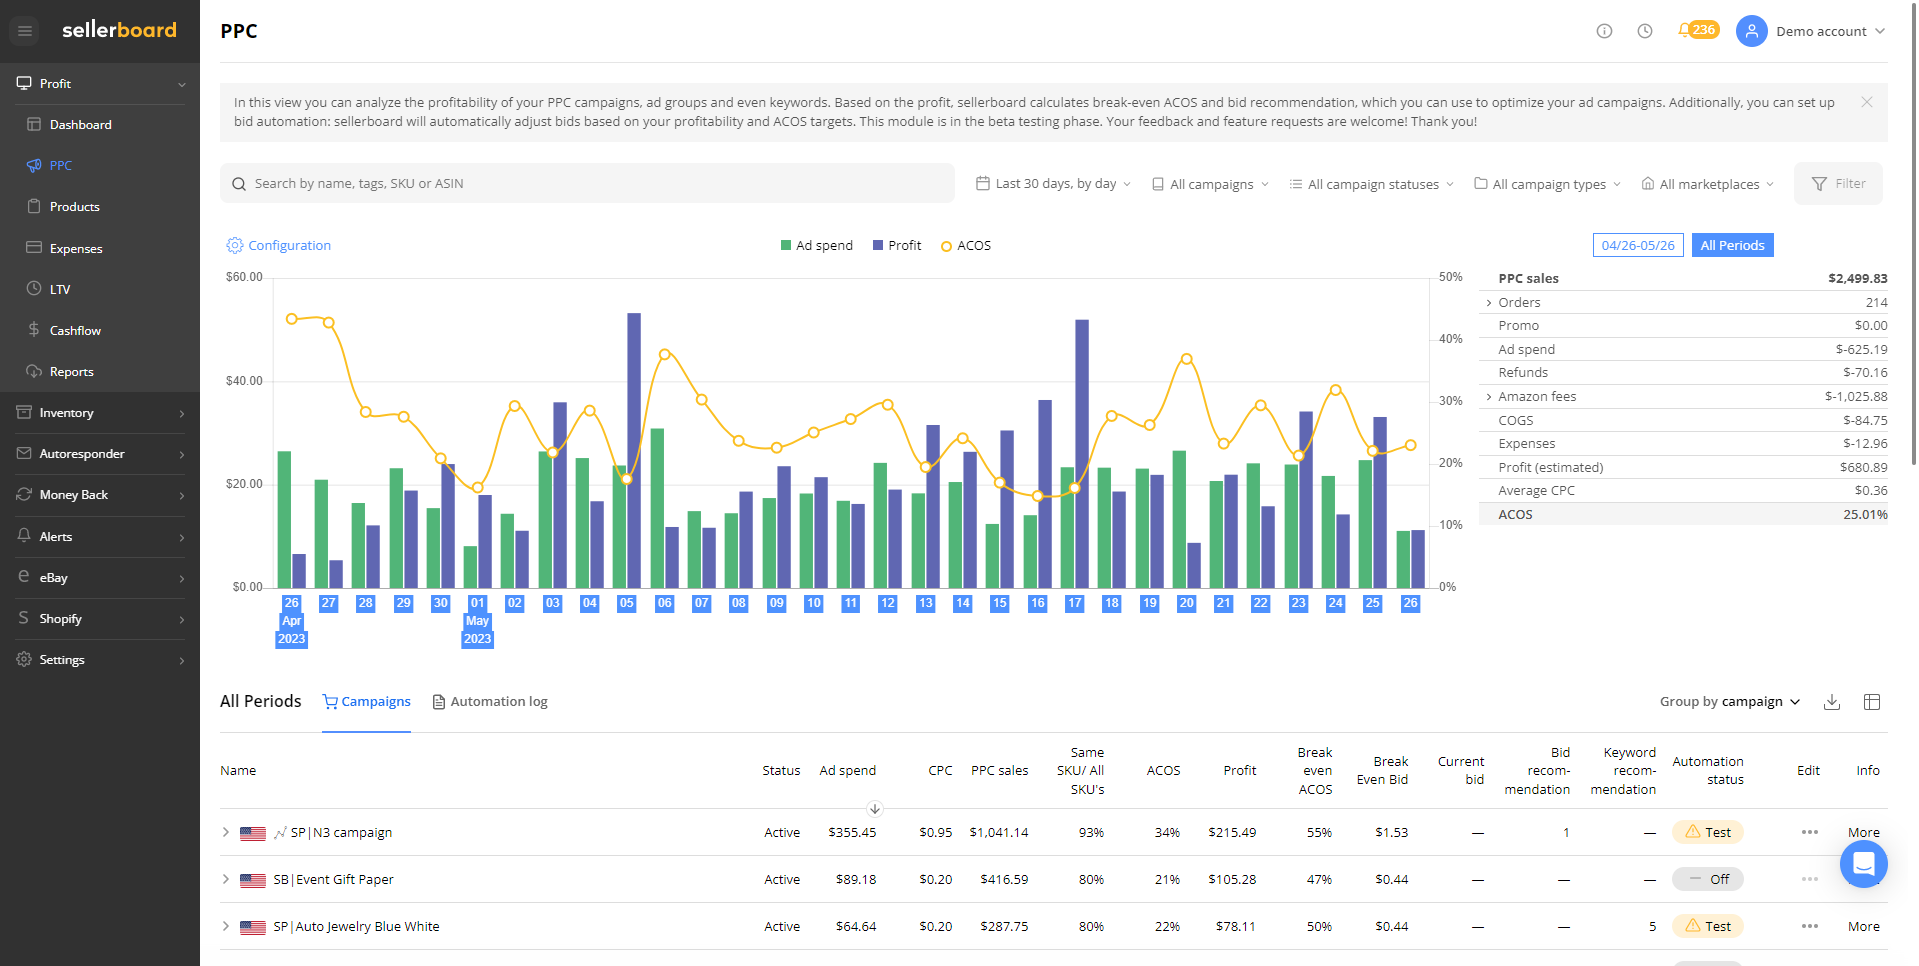 Track PPC profitability, reach target ACOS with bid automation and harvest keywords that perform better.